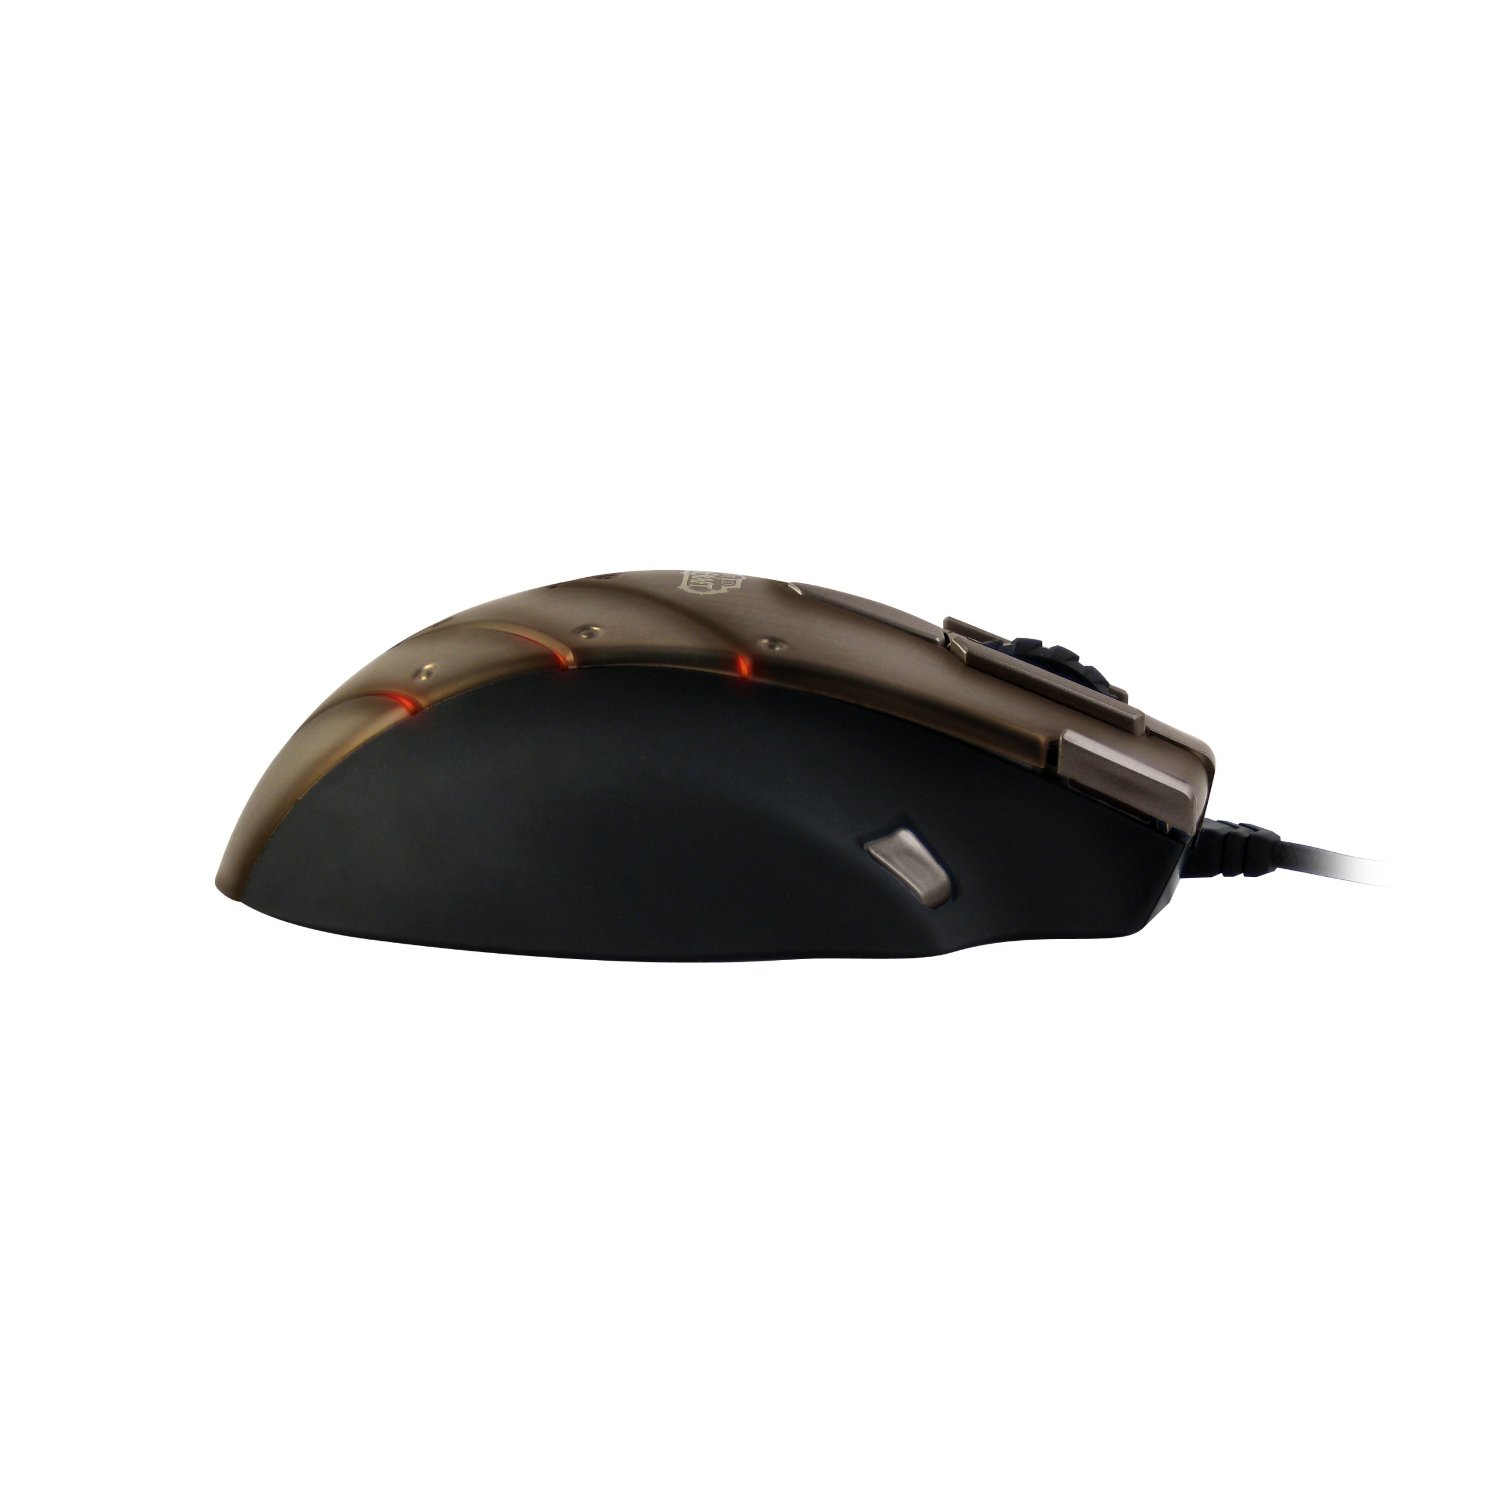 http://thetechjournal.com/wp-content/uploads/images/1202/1329465639-steelseries-world-of-warcraft-cataclysm-mmo-gaming-mouse-5.jpg